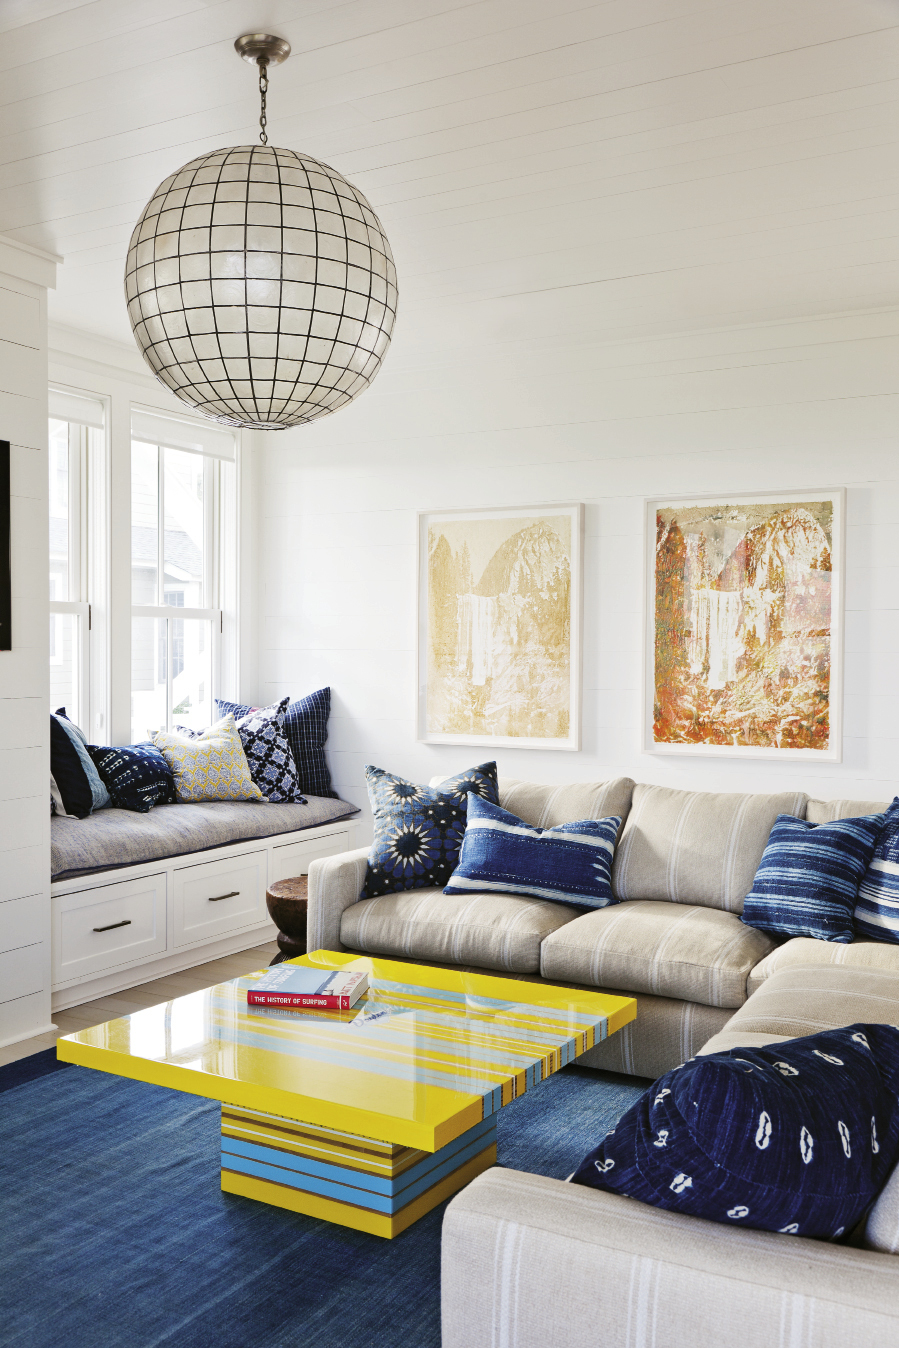 The family room hangs 10 with a bright yellow and blue surfboard-inspired table and an array of pillows made from vintage textiles. Delicious artwork by Matthew Brandt is made of Gummi Bears and Pixy Stixs.